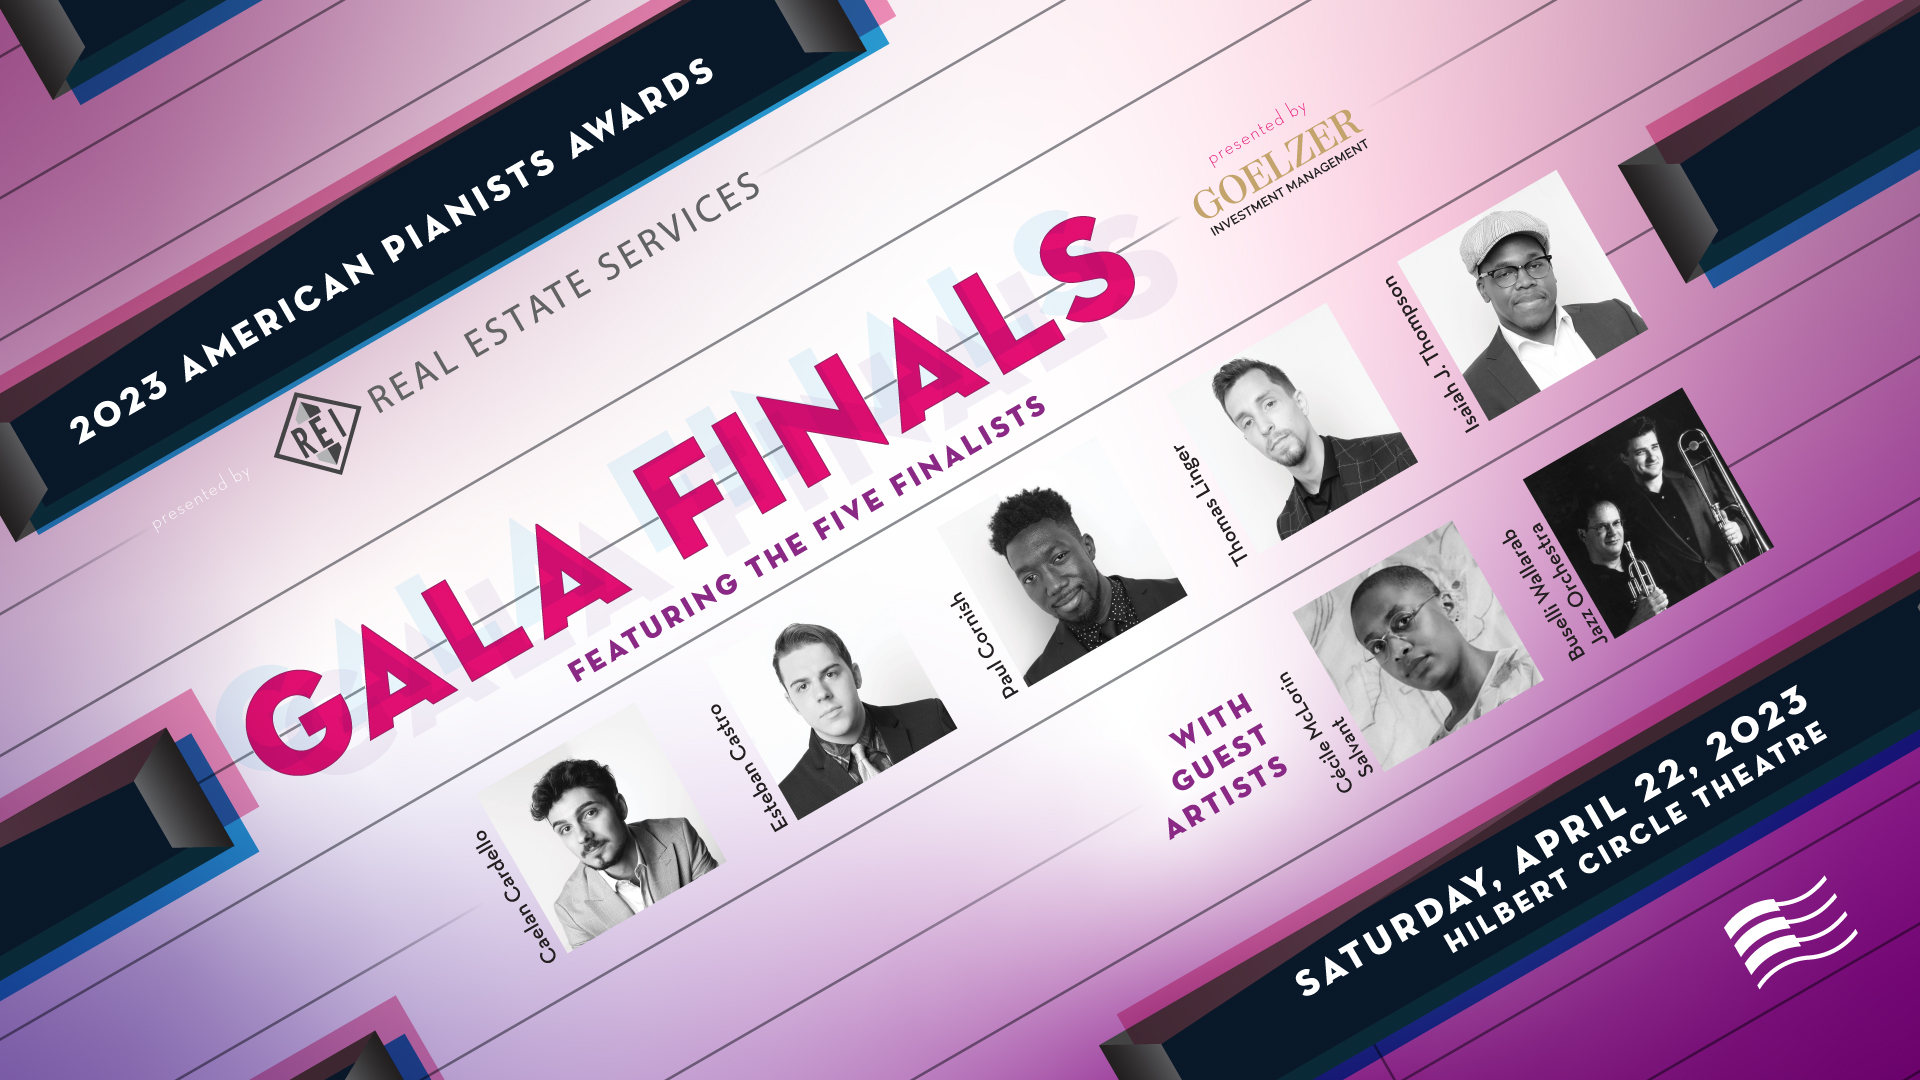 American Pianists Awards Gala Finals